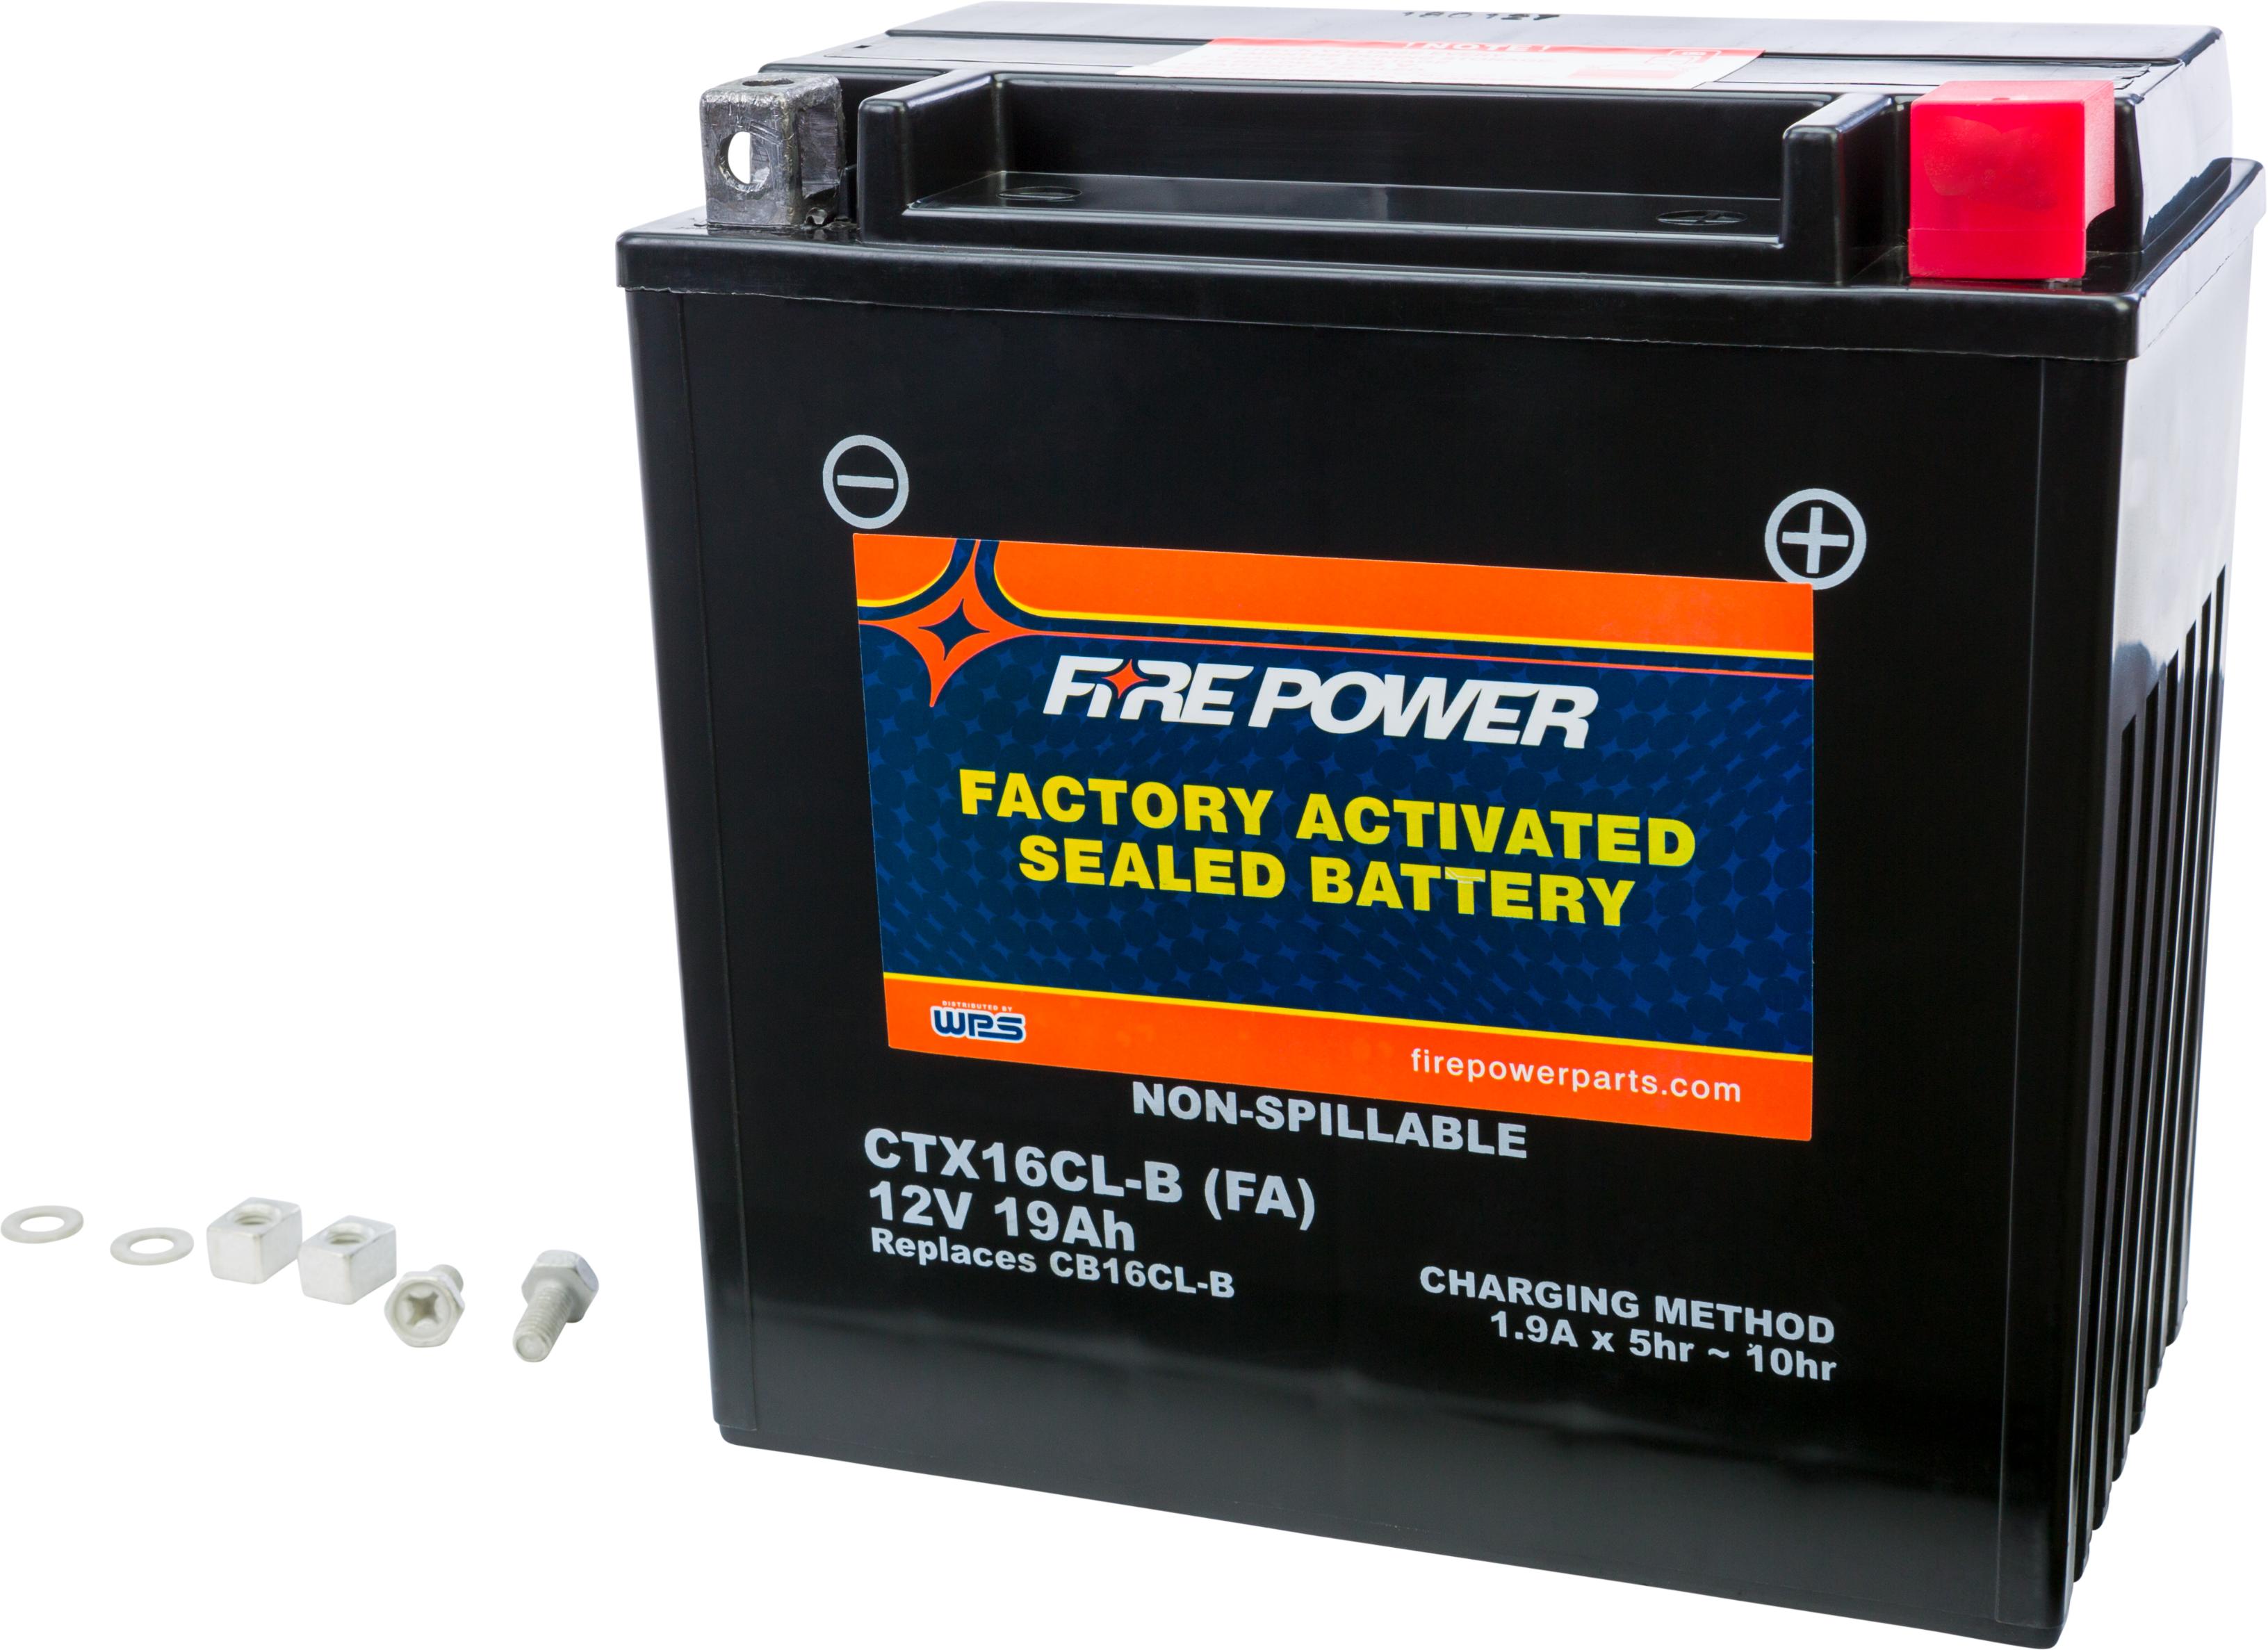 Fire Power - Battery Ctx16cl-b Sealed Factory Activated - CT16CL-B-BS(FA)